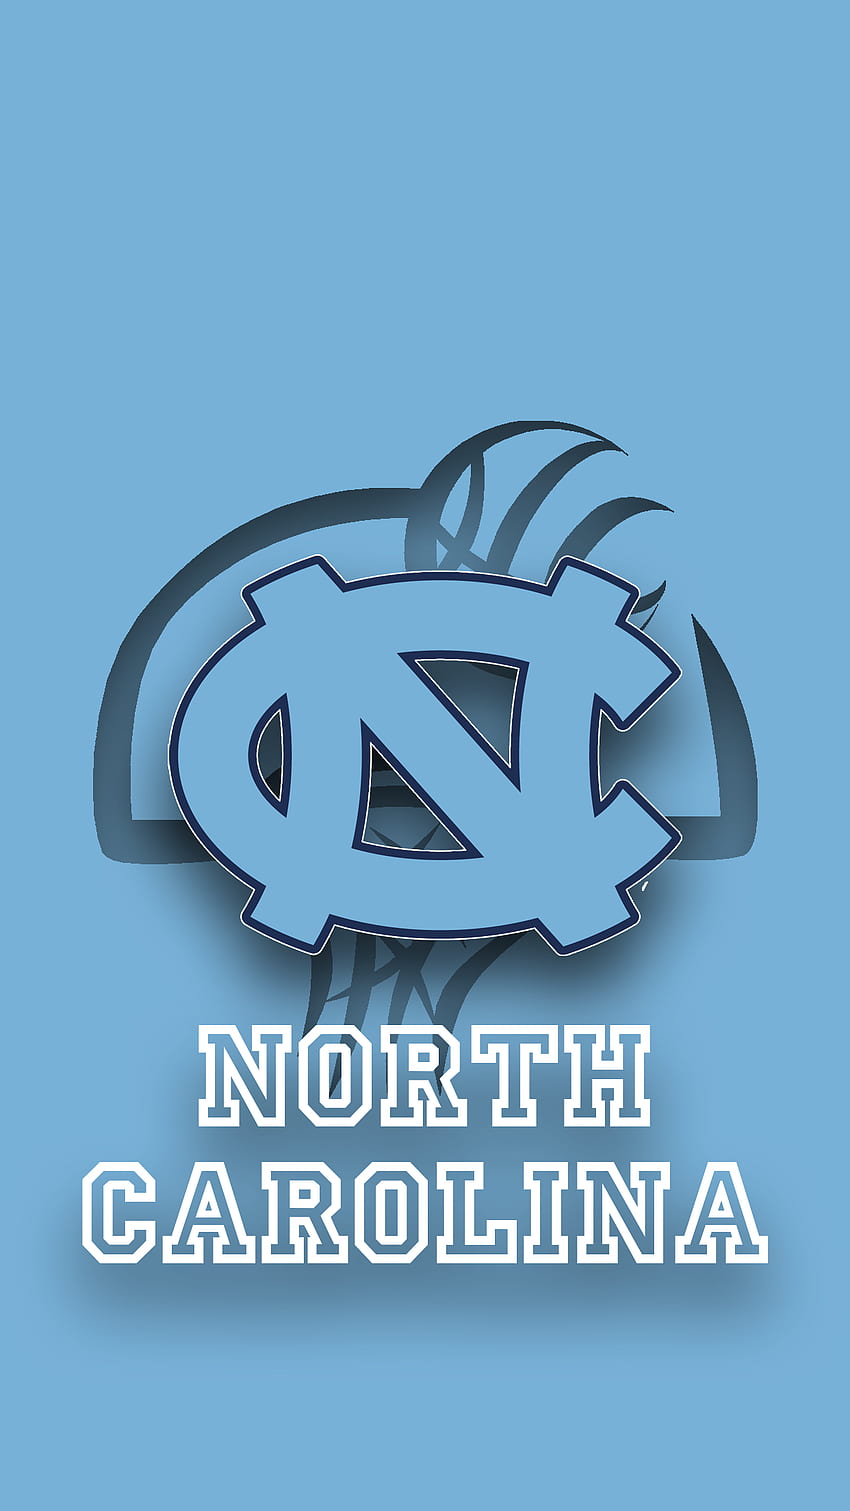 Coach Griffin on Twitter Made some new UNC iPhone wallpapersget it if  you want it GO HEELS httptcoBsEiJ9CXqi  Twitter